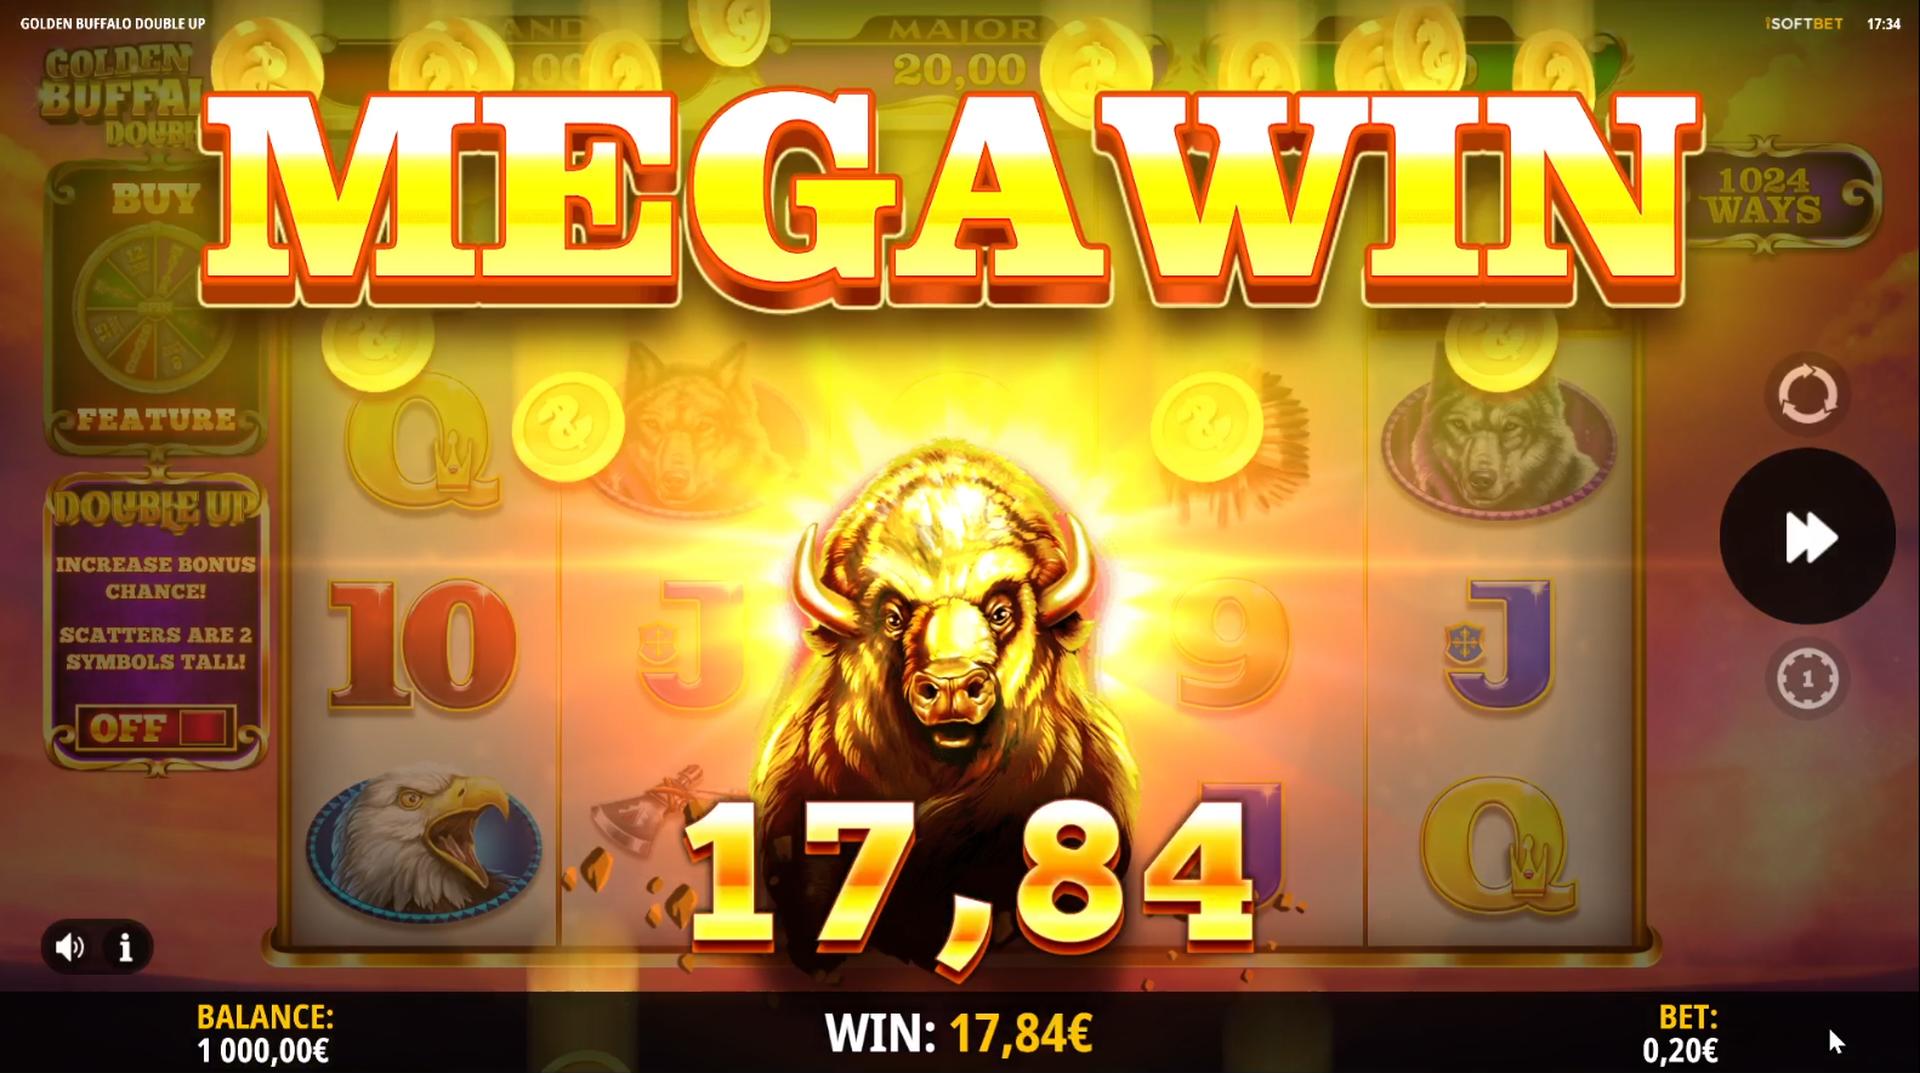 Advantages of 1win Casino for Golden Buffalo Players